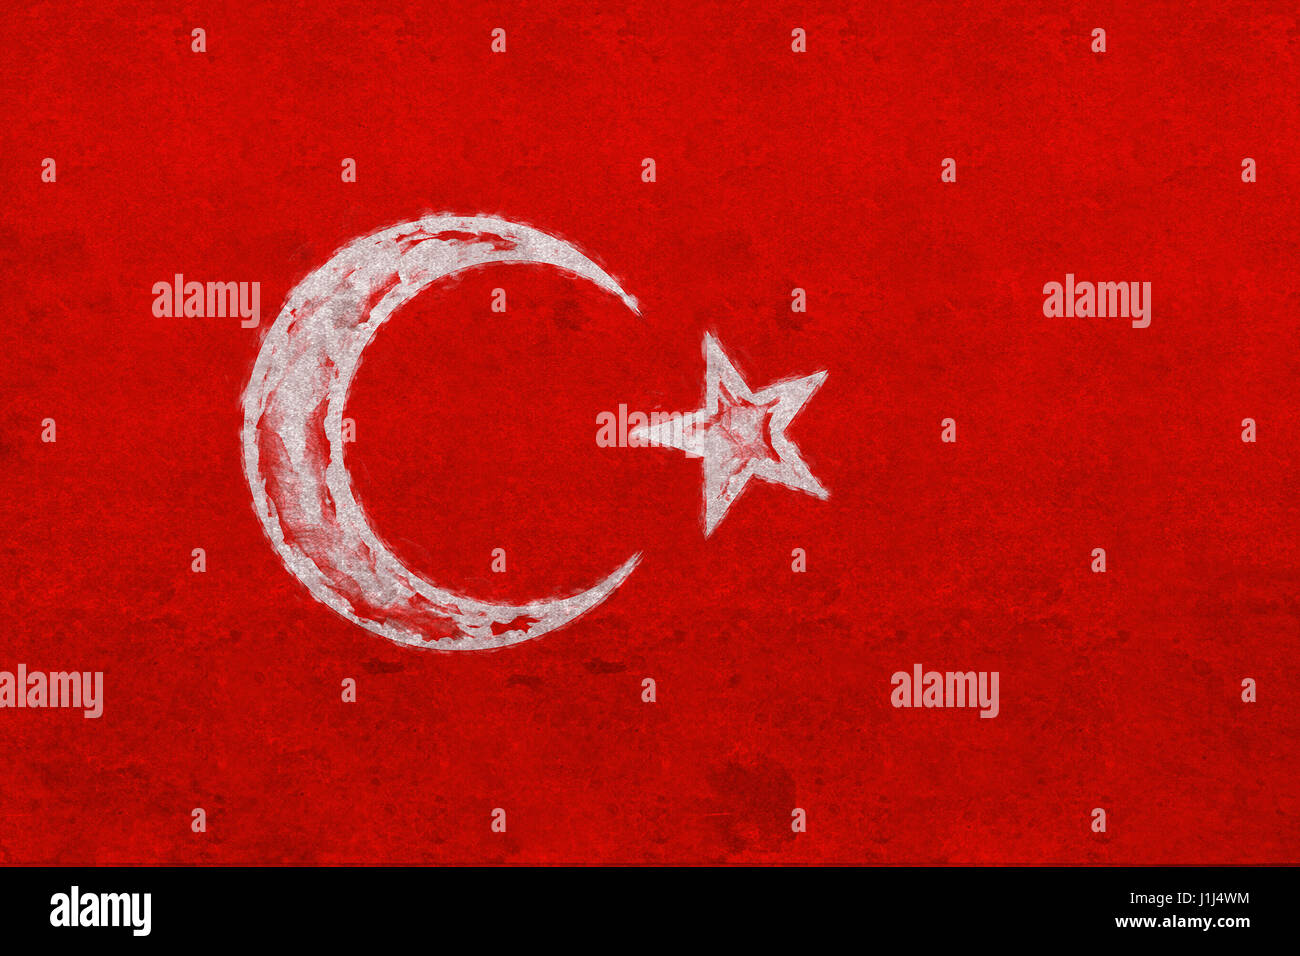 Illustration of the national flag of Turkey with a grunge look Stock Photo